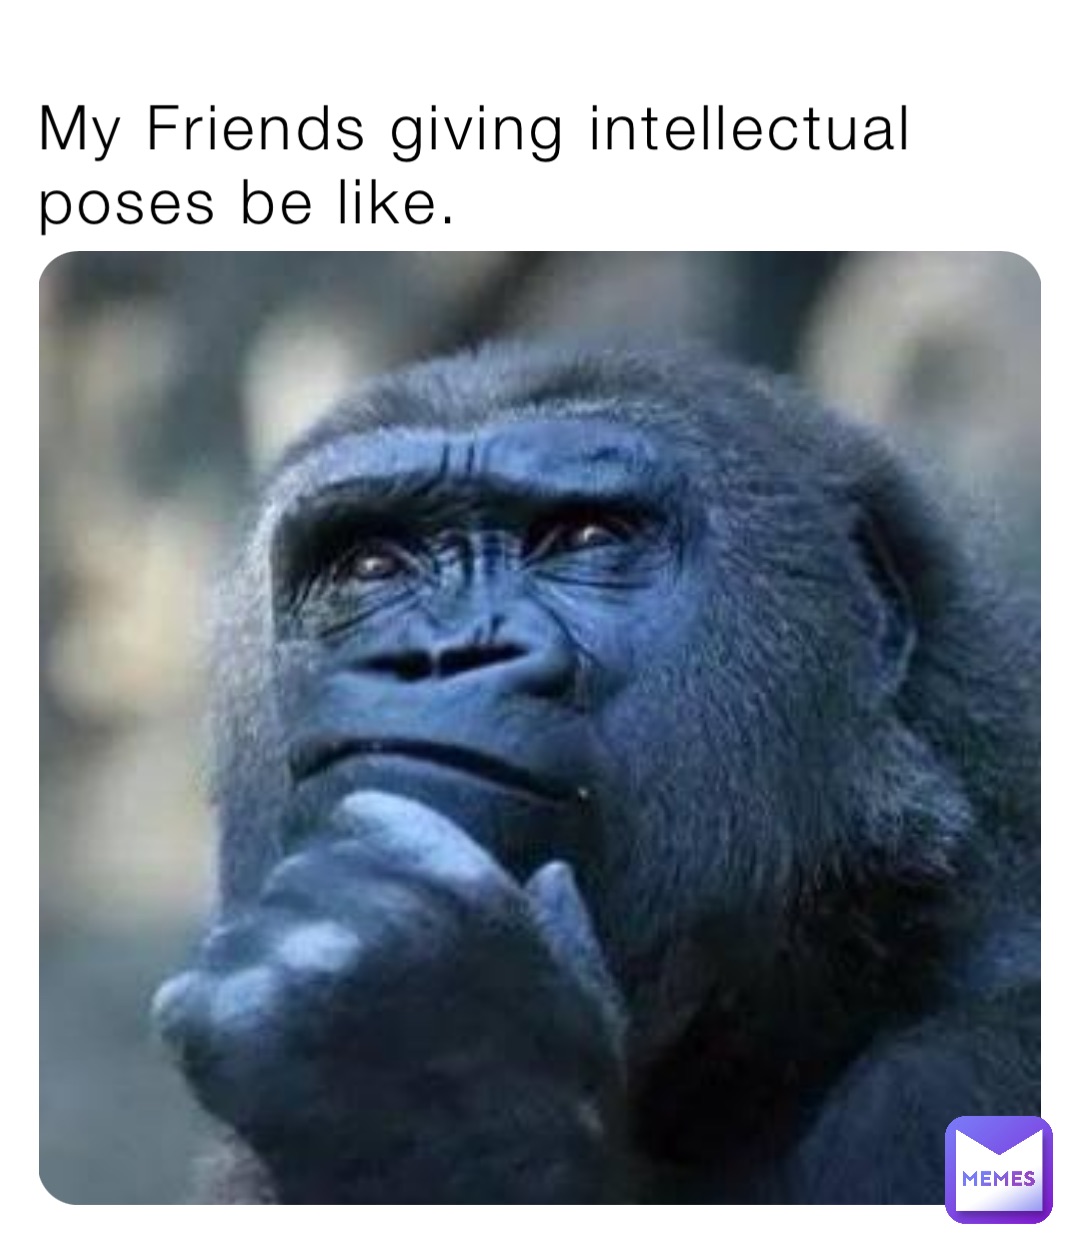 My Friends giving intellectual poses be like.